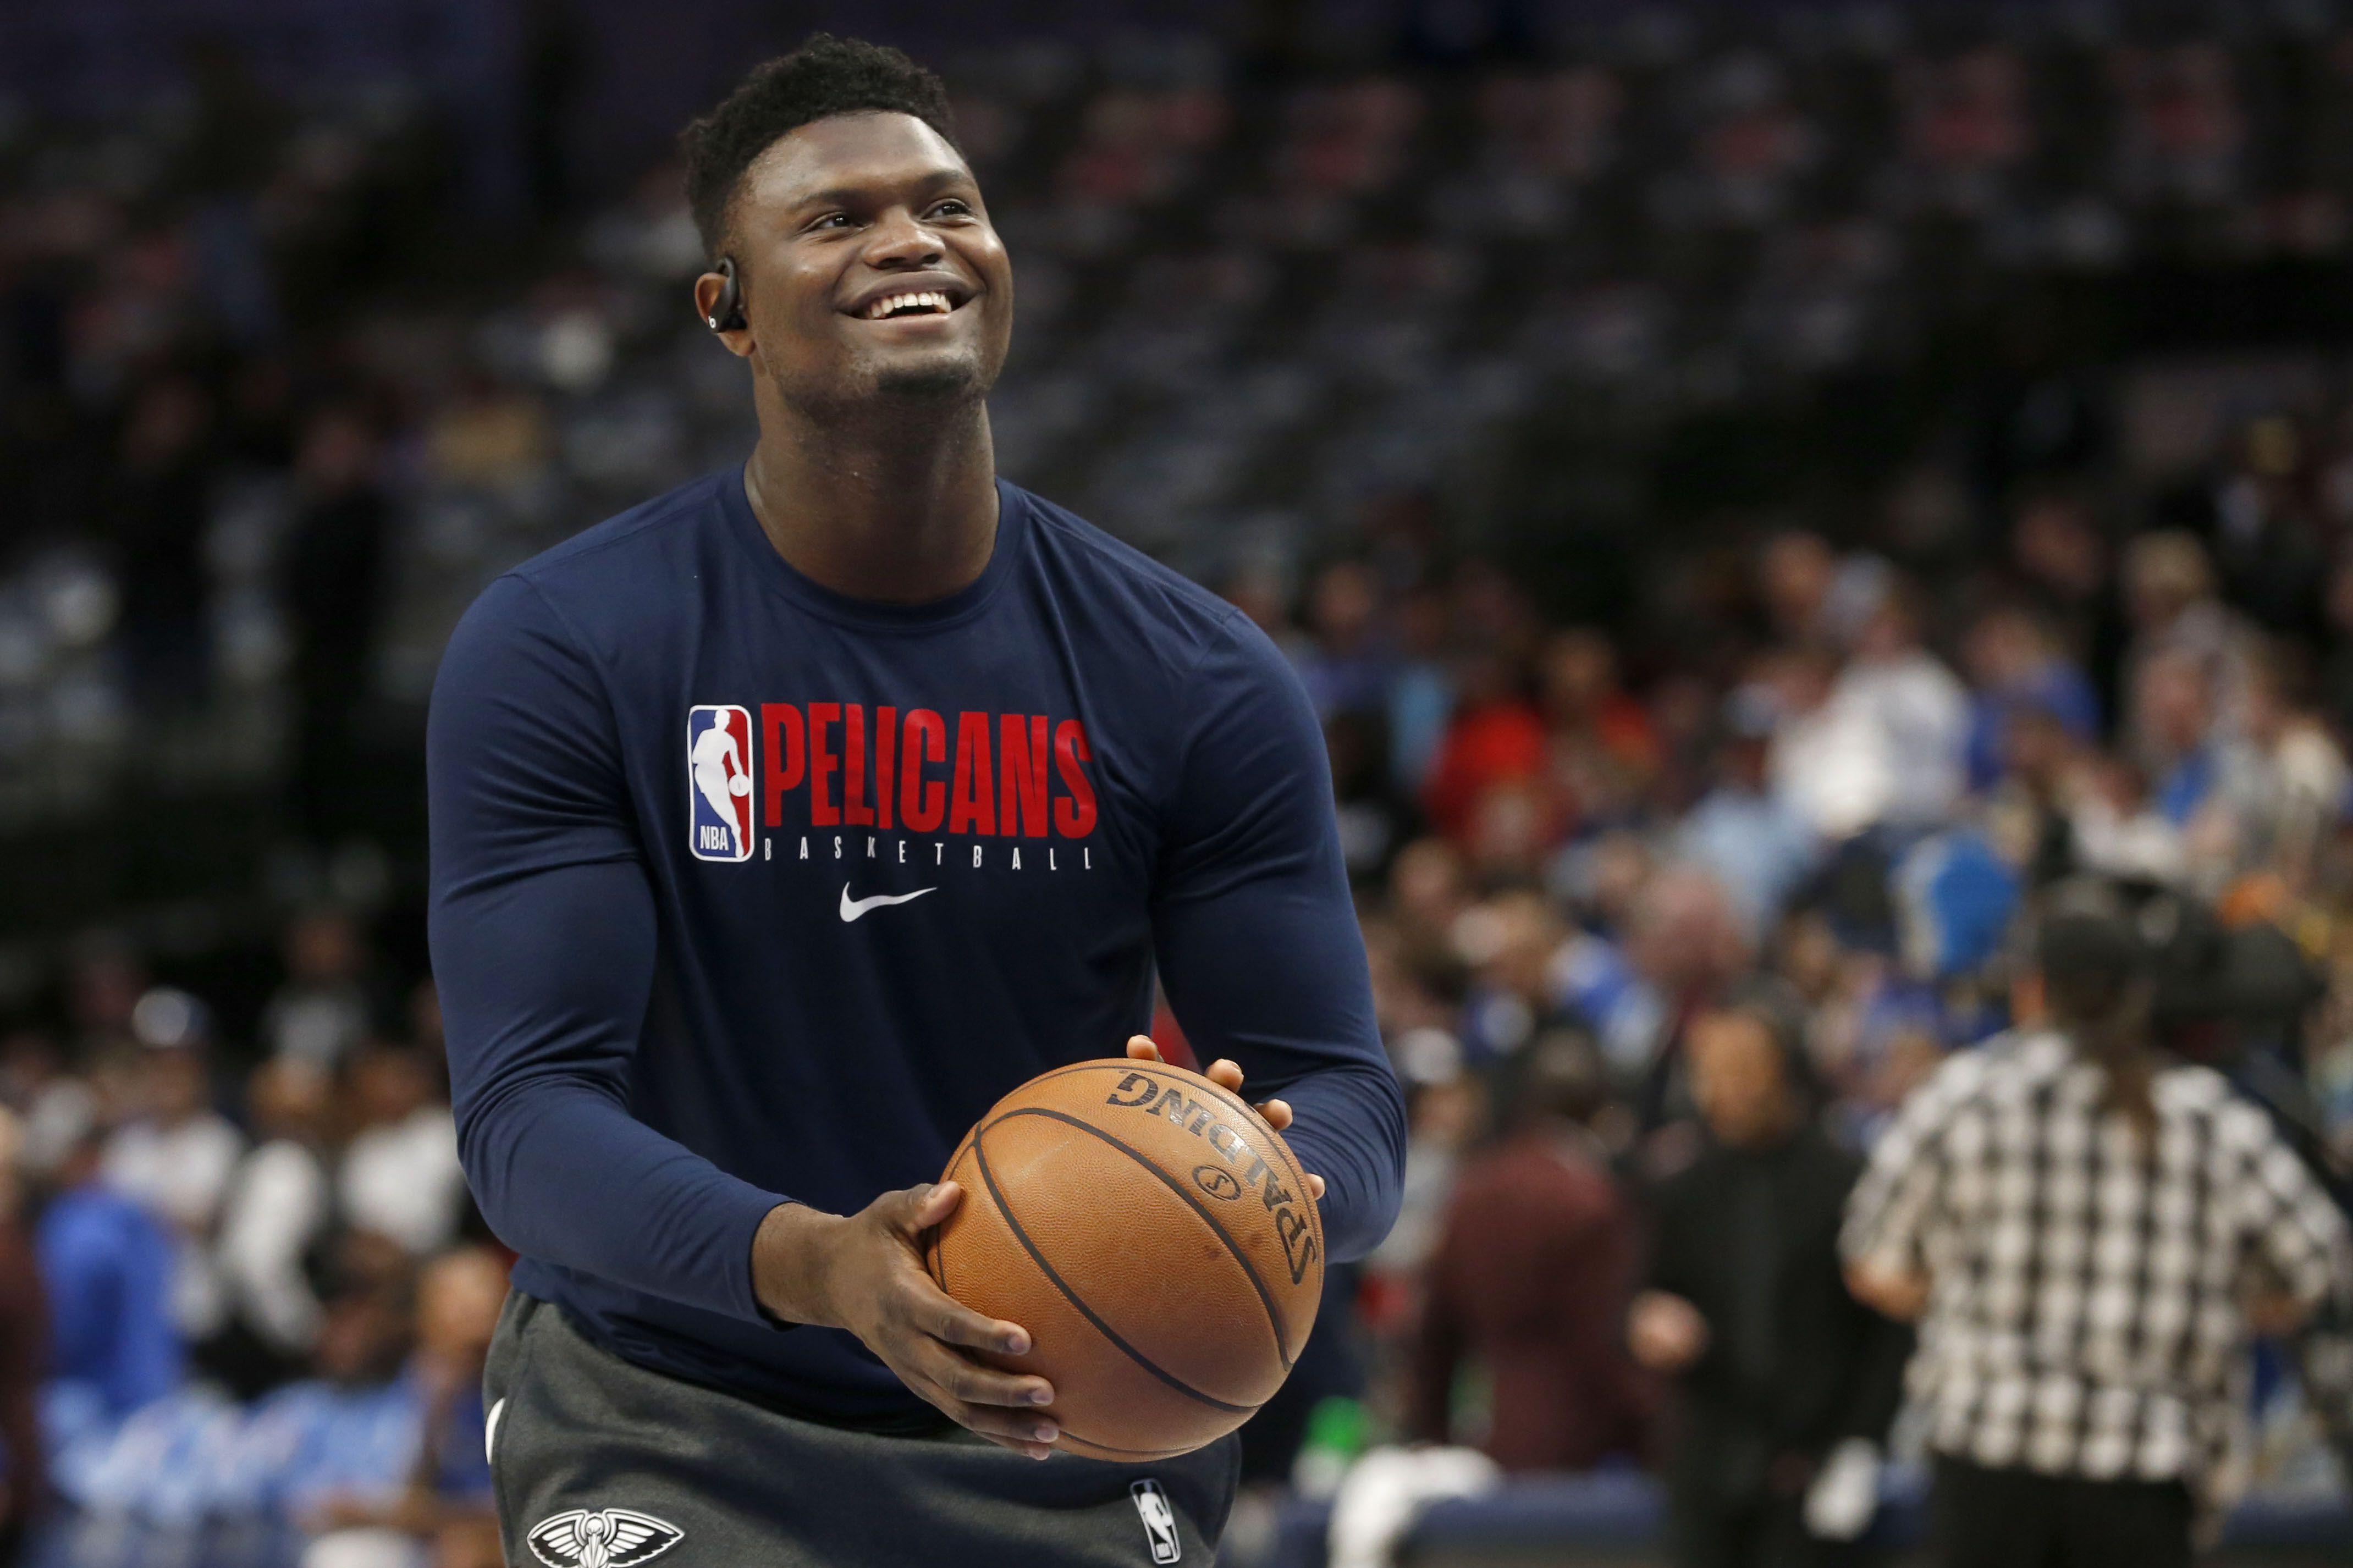 Inside Zion Williamson's NBA All-Star Weekend debut - The Washington Post